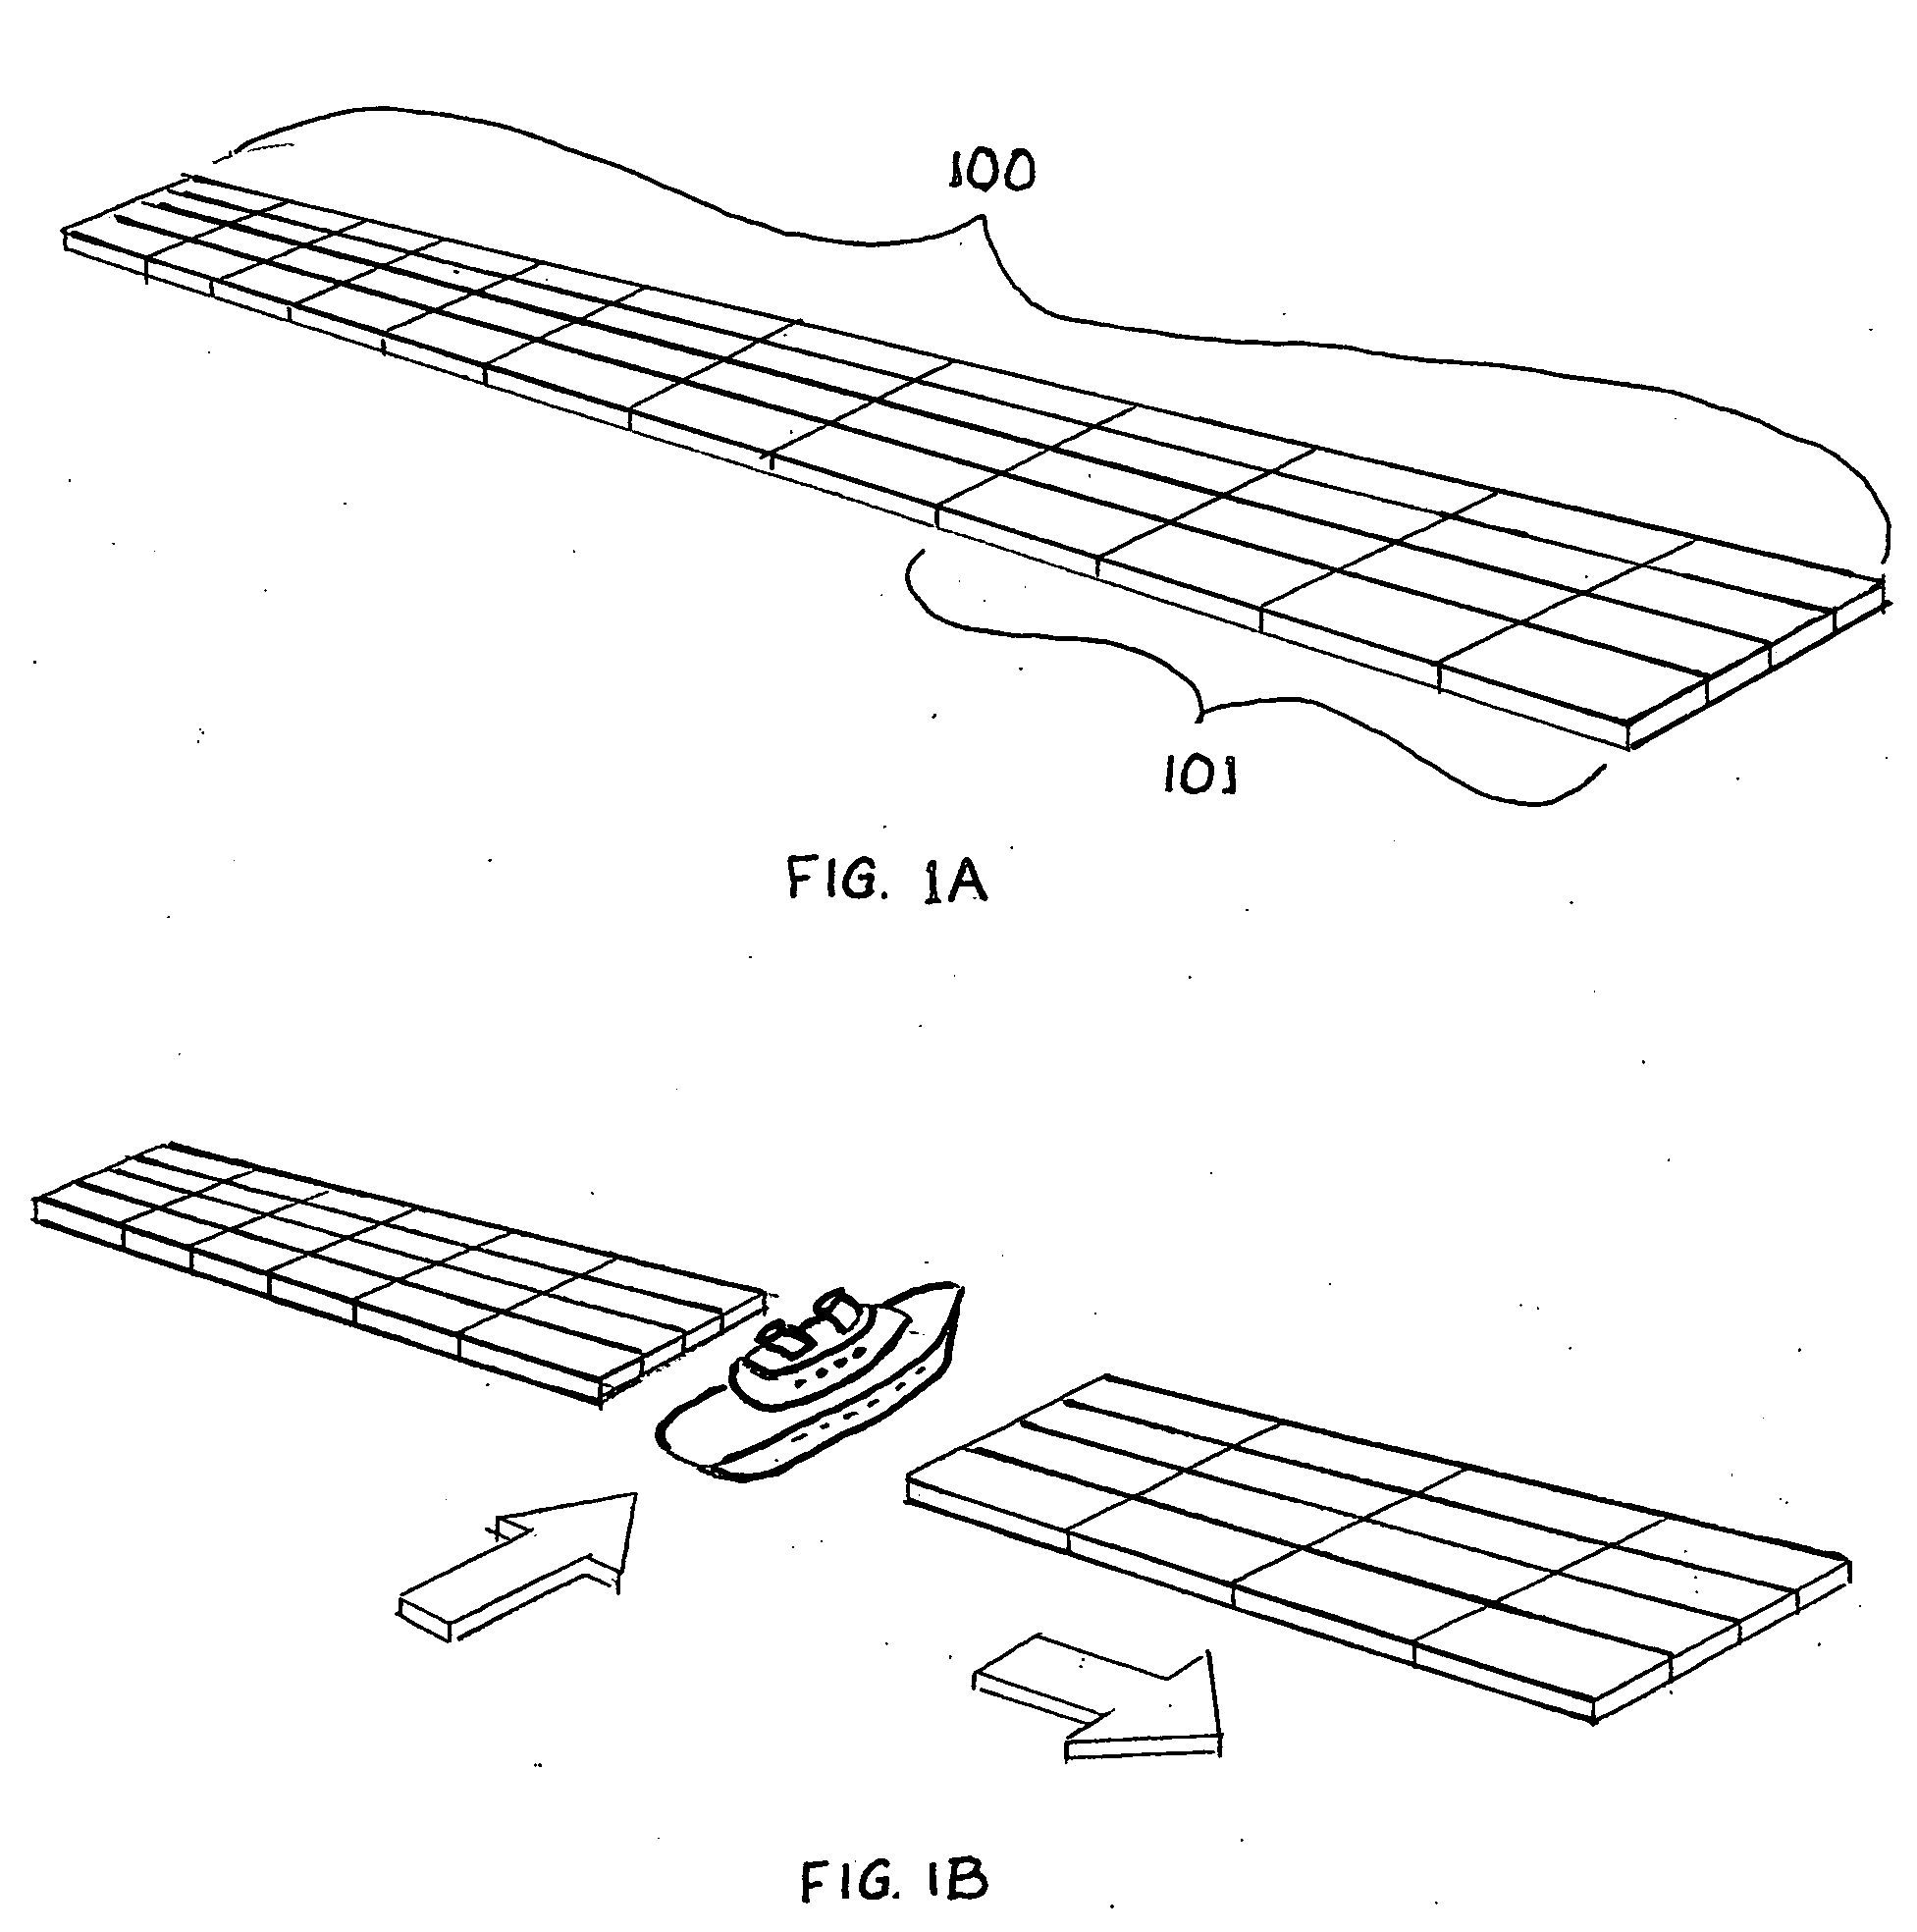 Method and apparatus for ocean energy conversion, storage and transportation to shore-based distribution centers